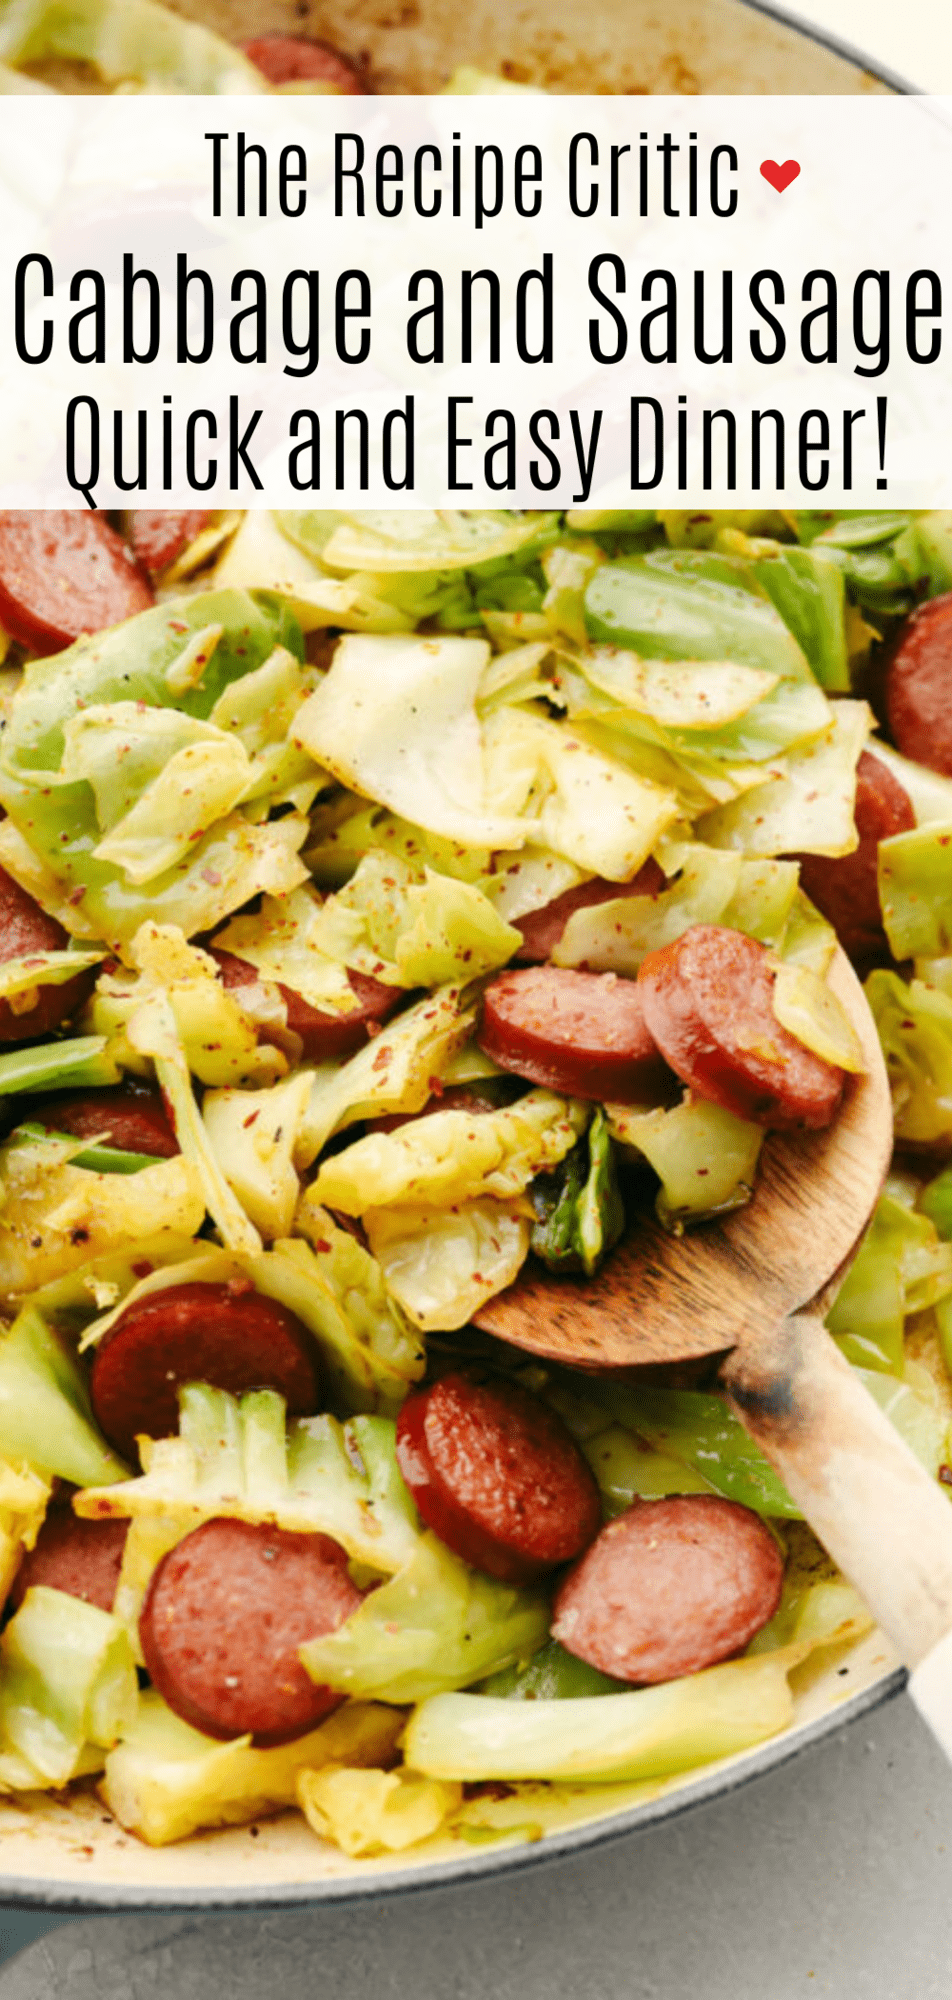 Sauteed Sausage and Cabbage Recipe